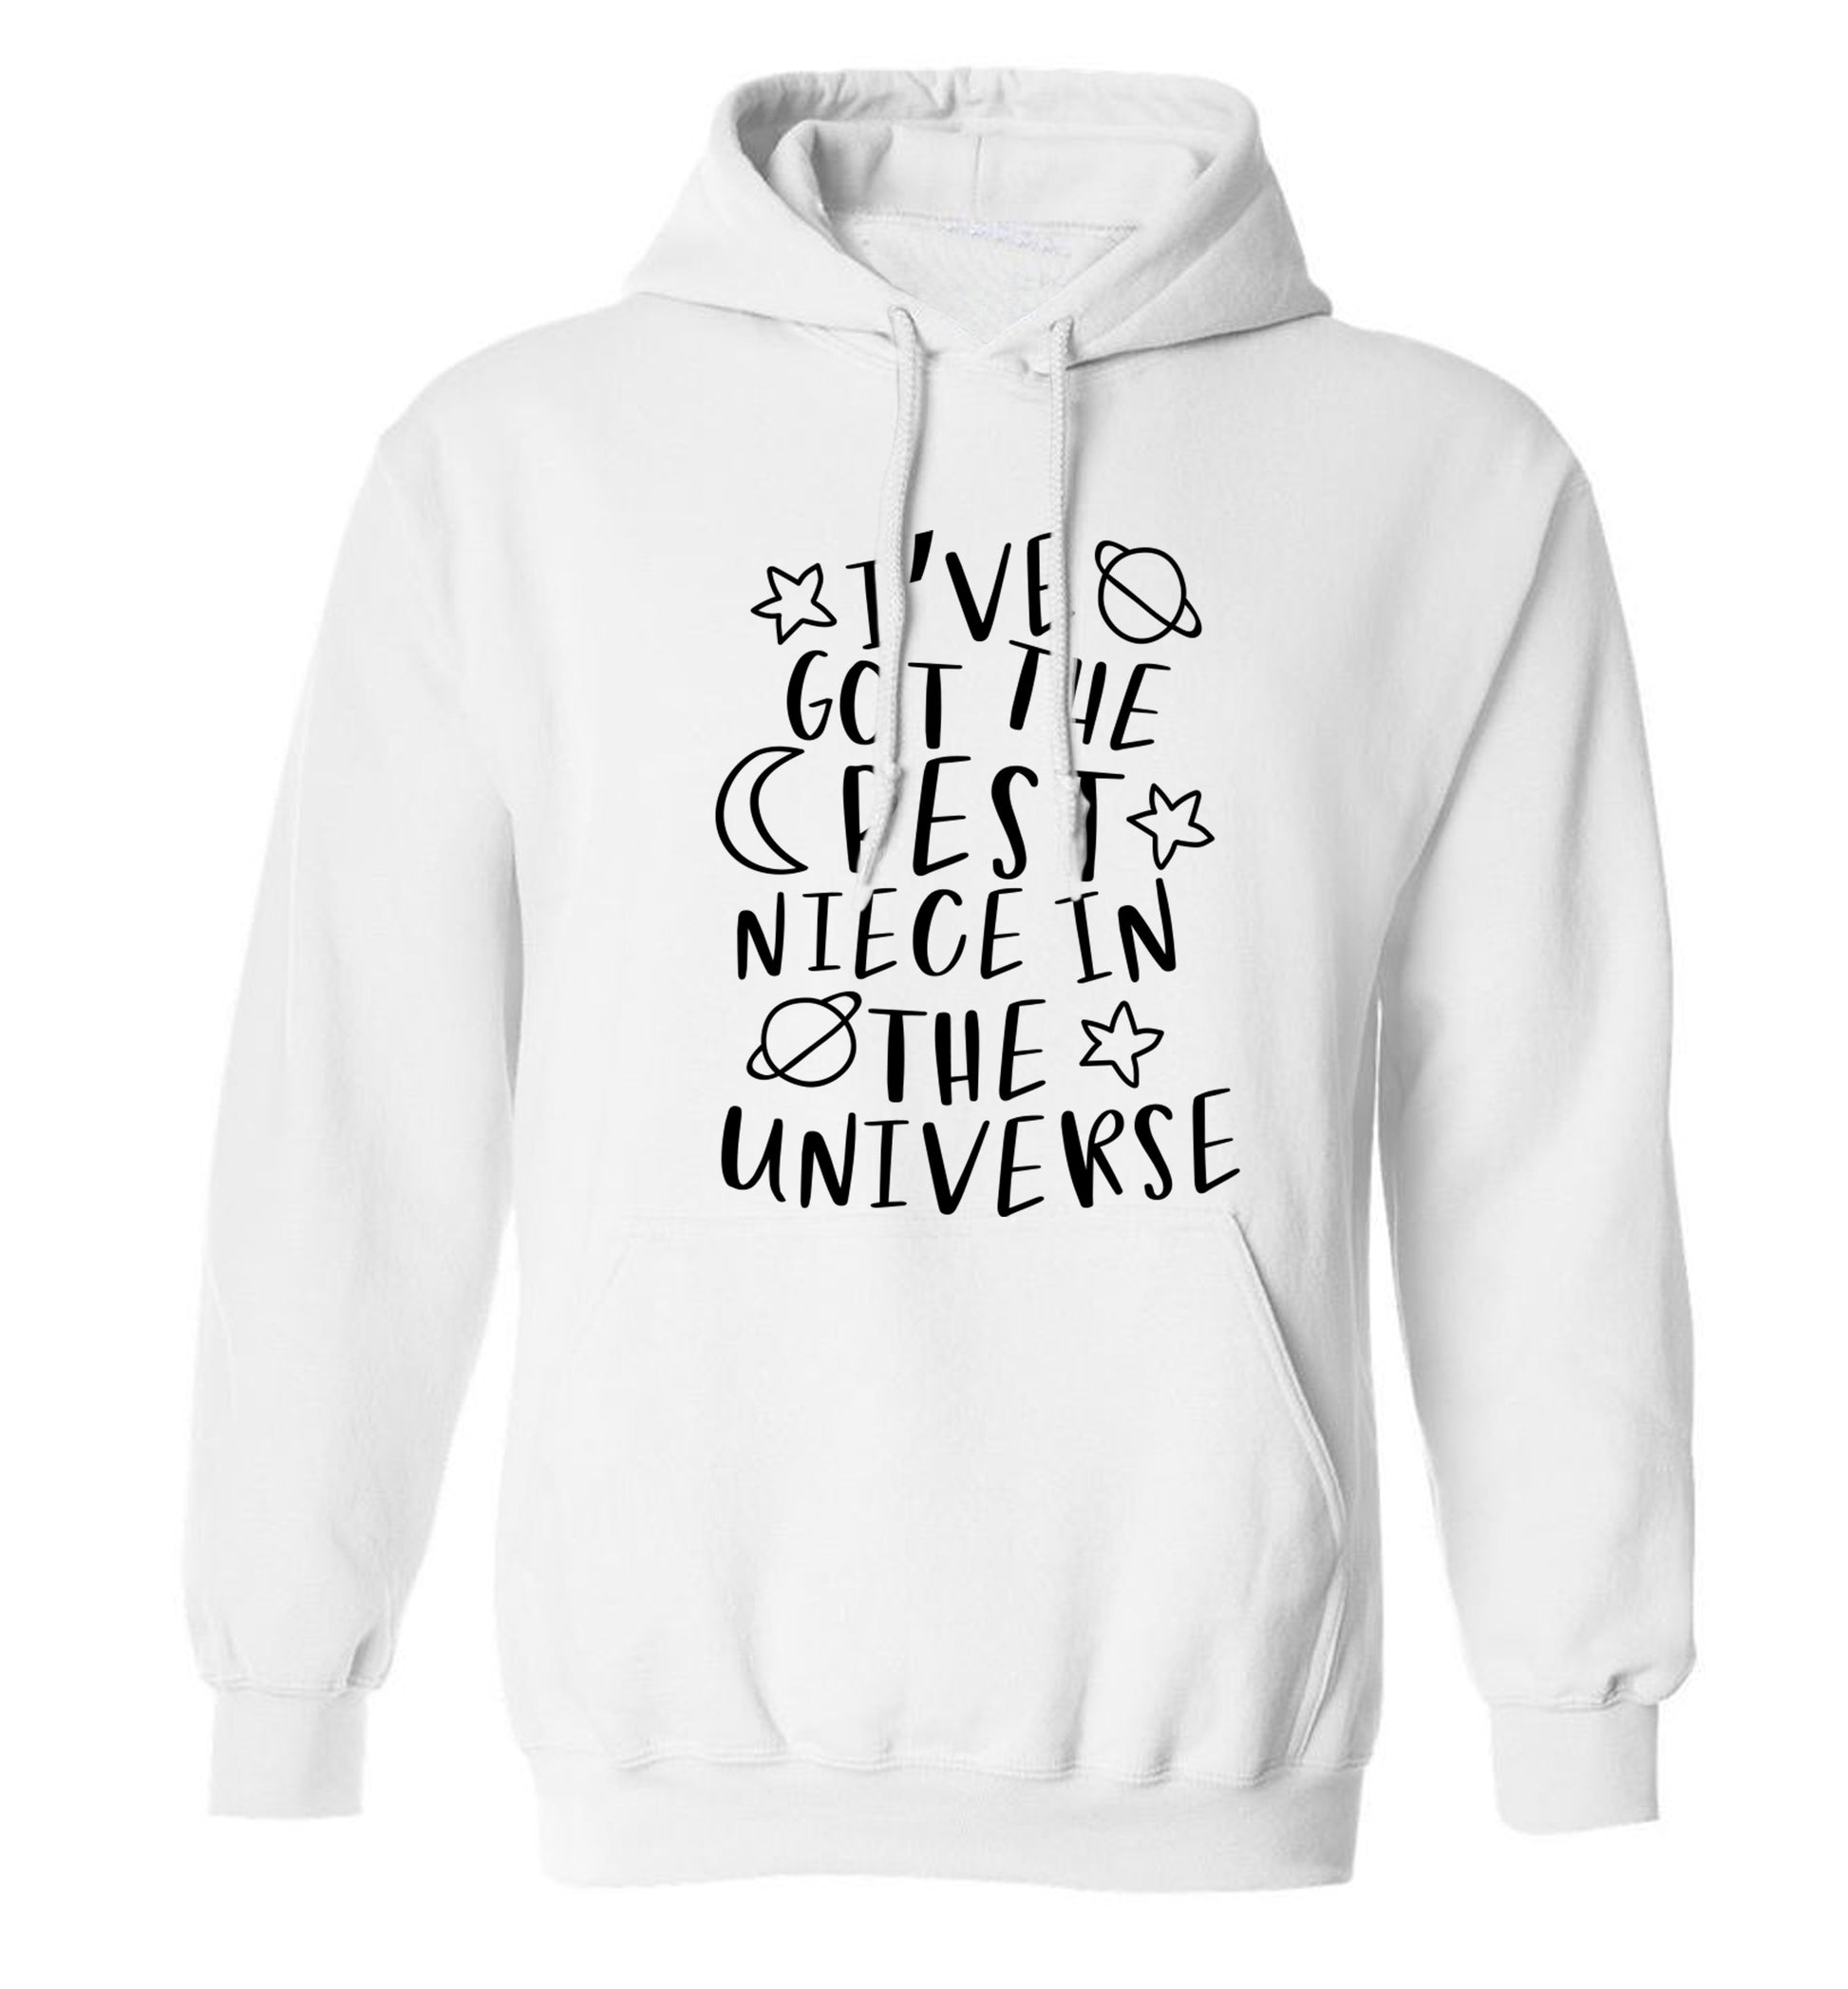 I've got the best niece in the universe adults unisex white hoodie 2XL